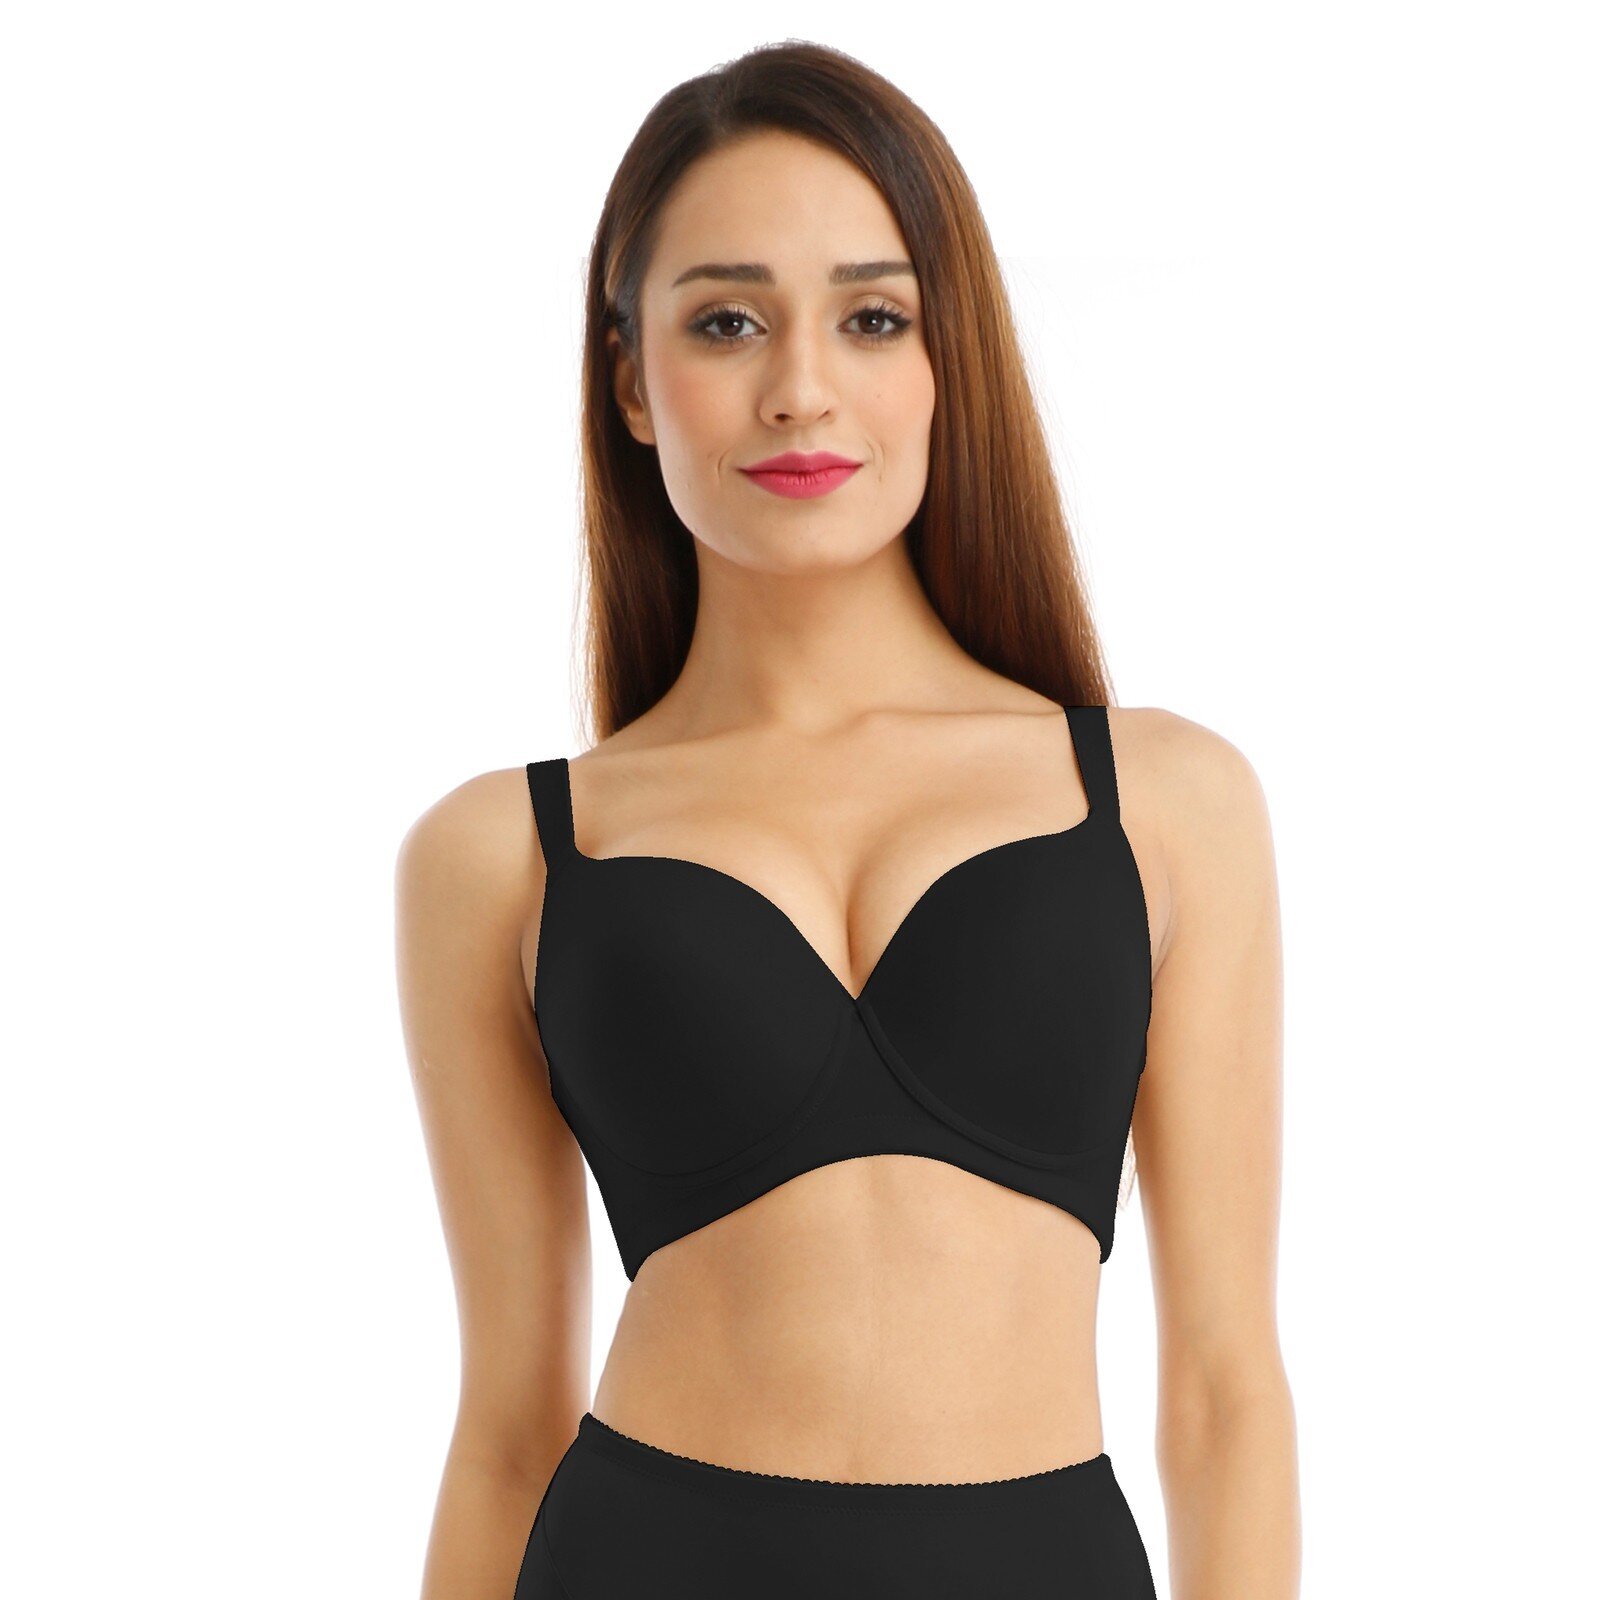 Which type of bra is best? Which is better: an underwired bra or a non-wired  bra?